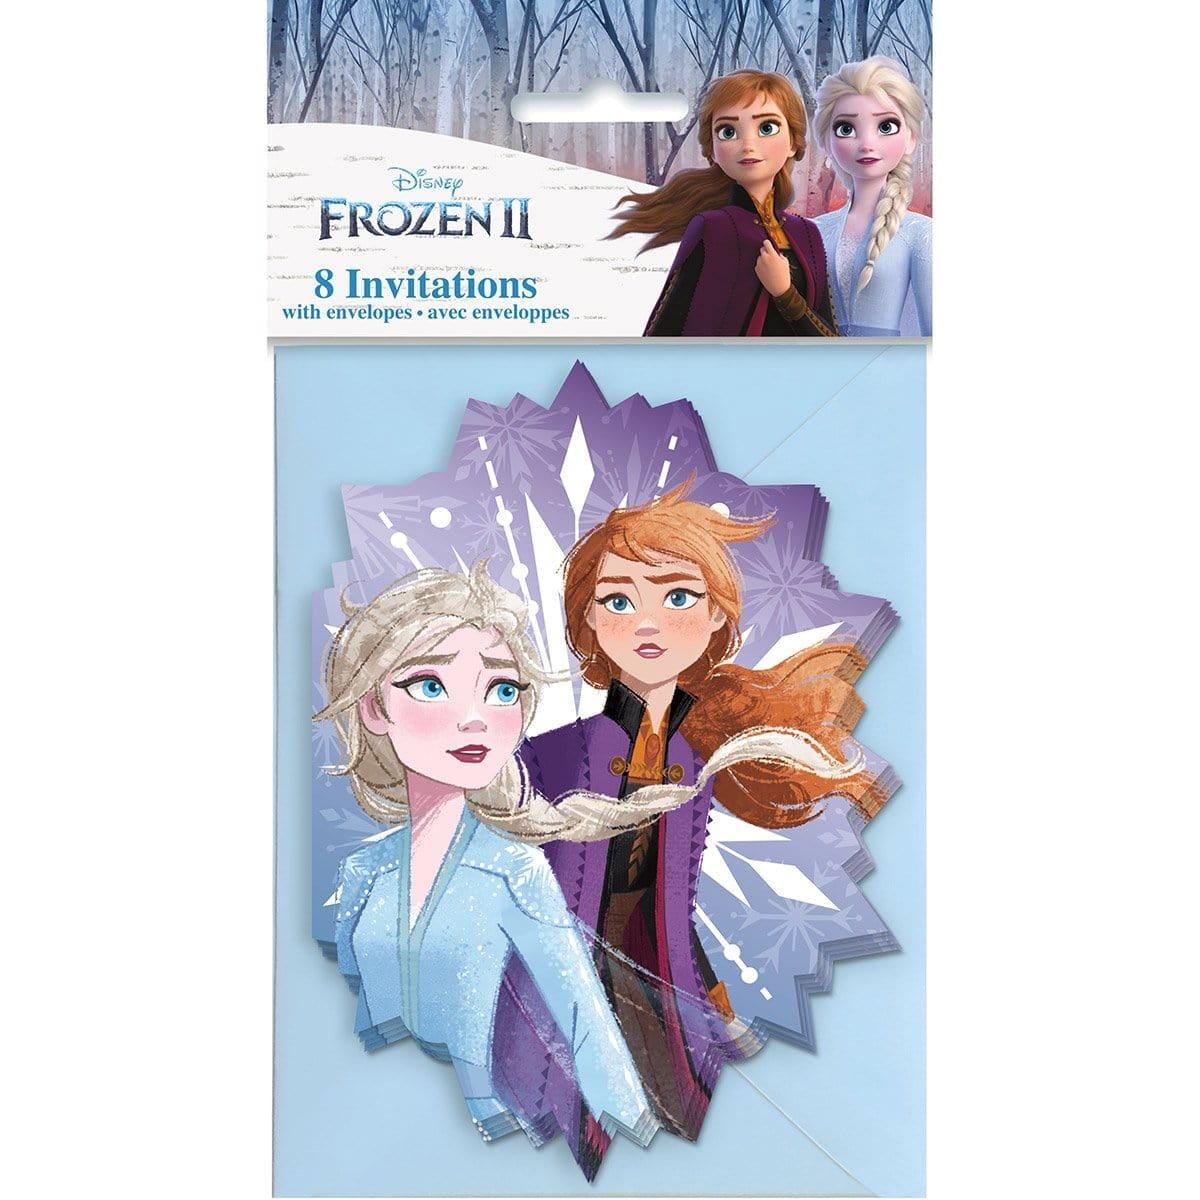 Buy Kids Birthday Frozen 2 invitations, 8 per package sold at Party Expert